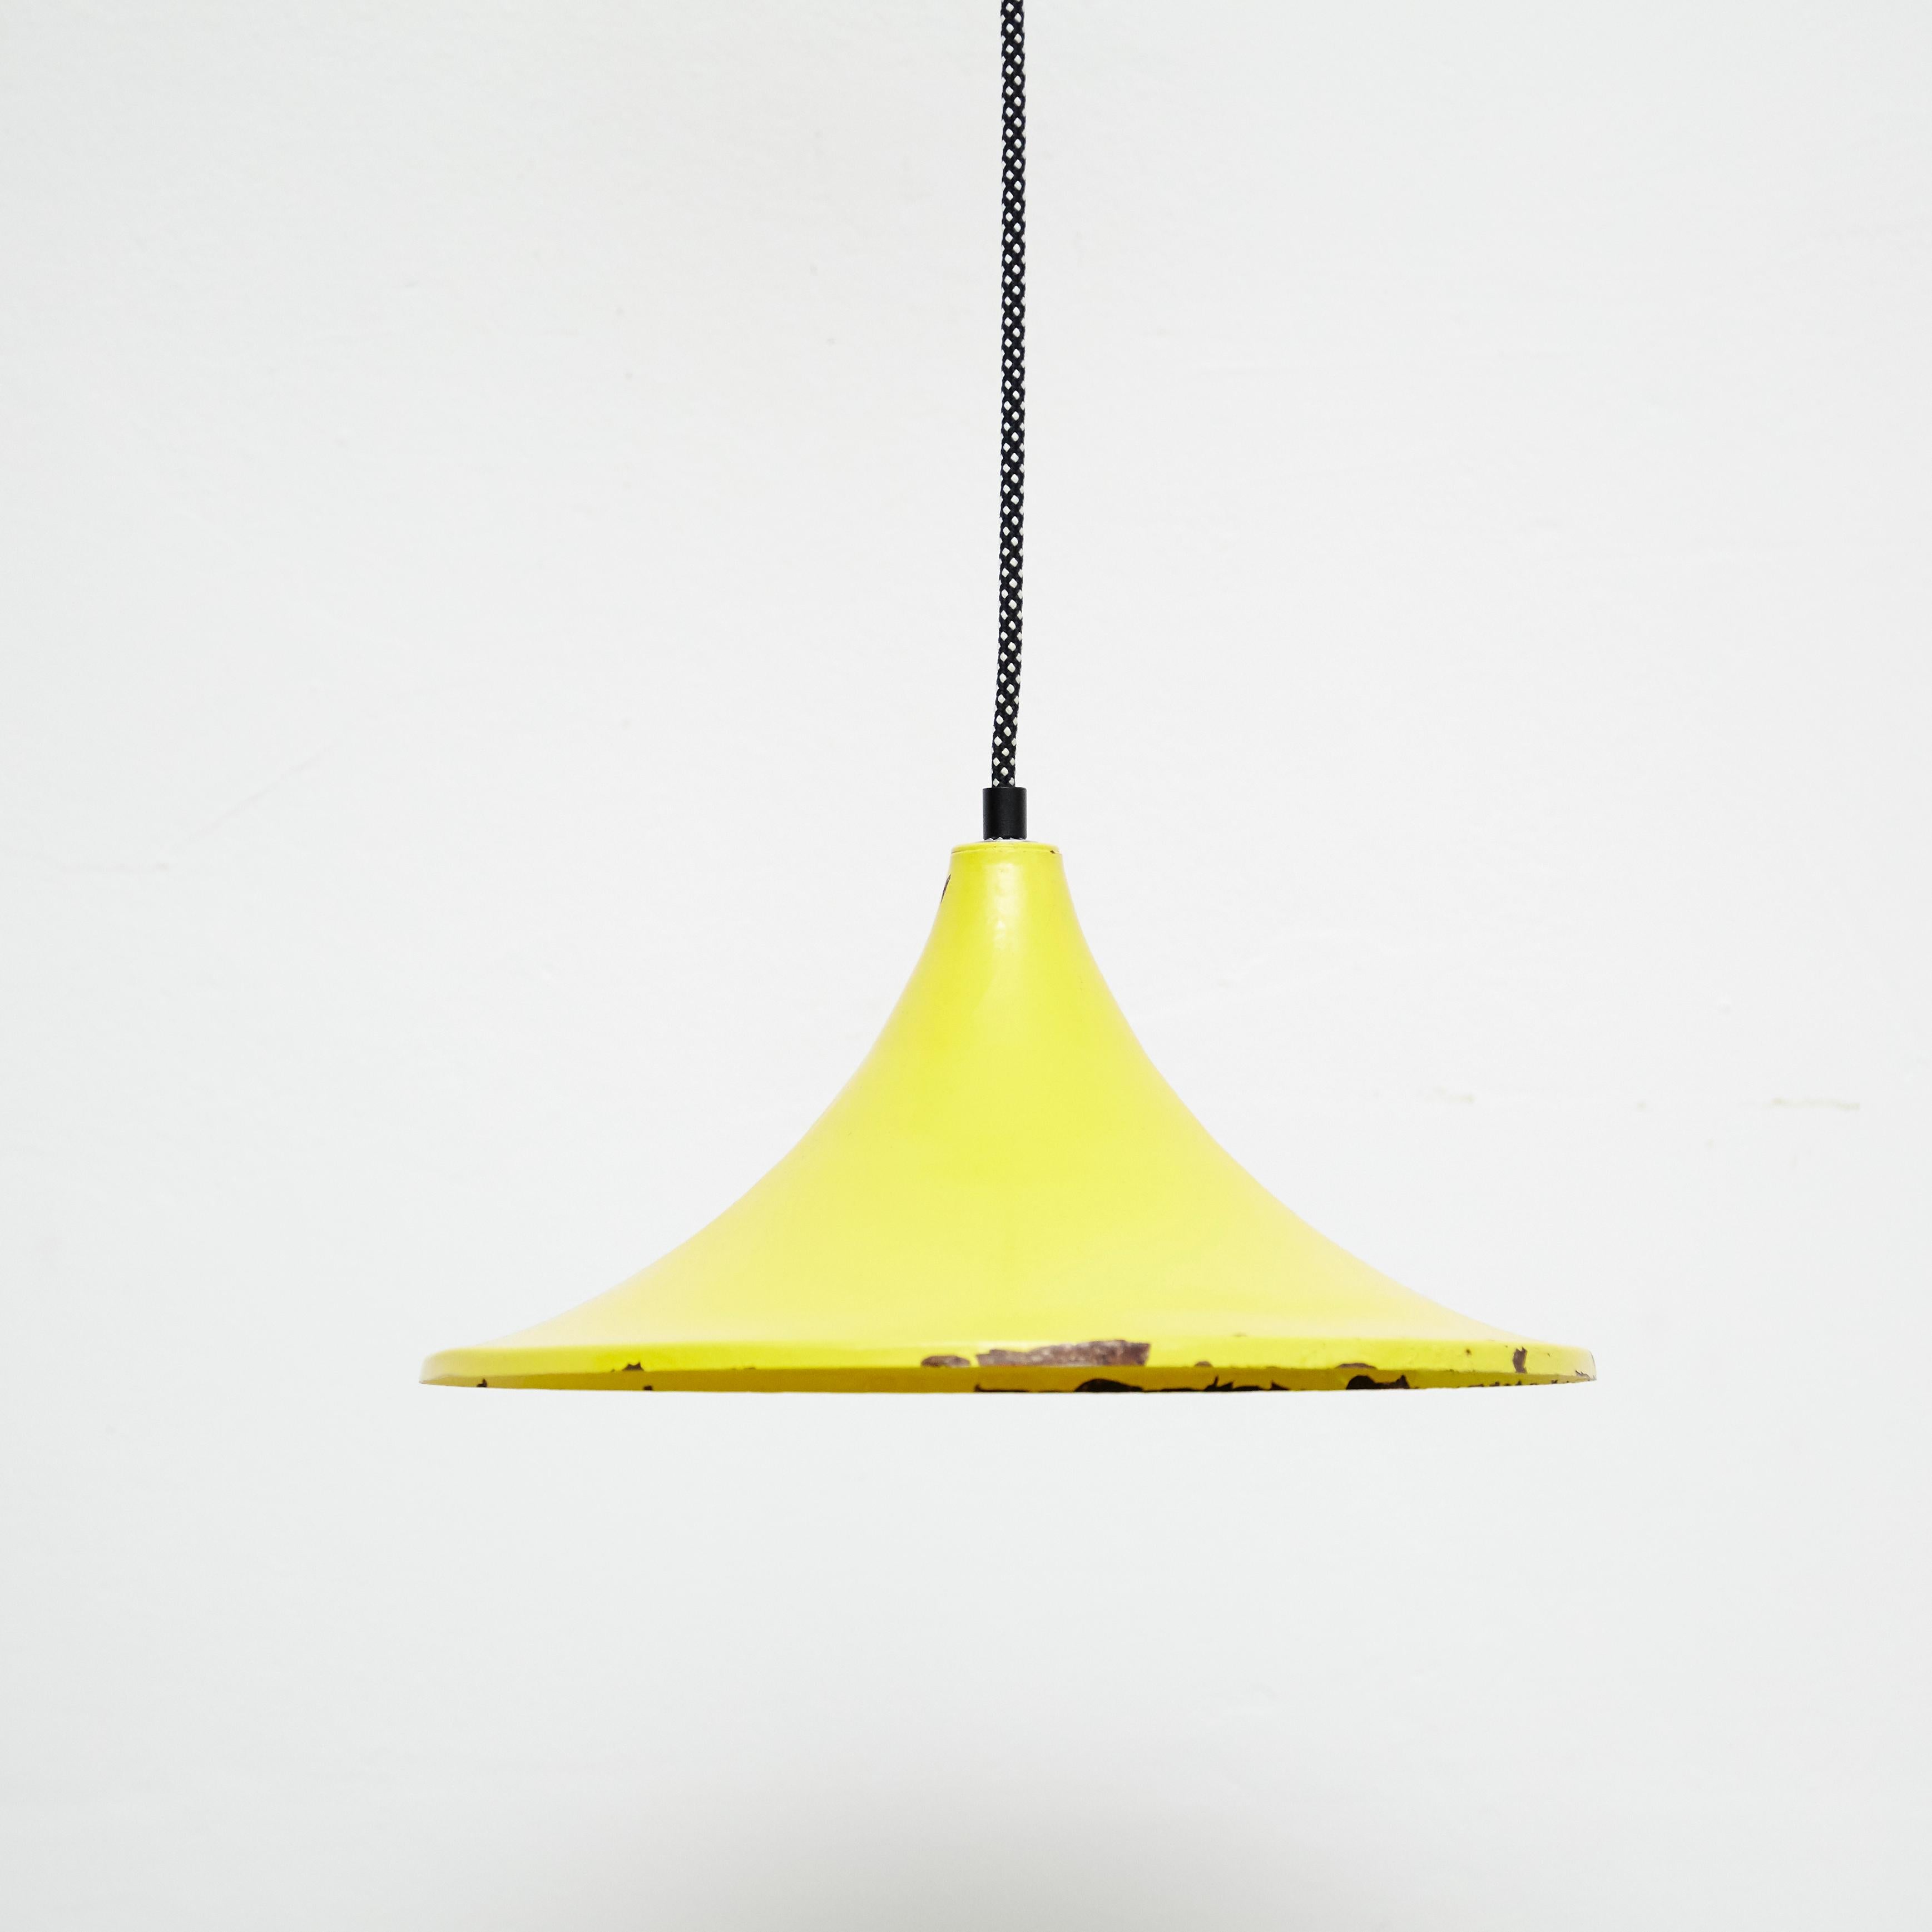 Early 20th century antique yellow brass ceiling lamp.
By unknown manufacturer, France.
In original condition, with minor wear consistent with age and use, preserving a beautiful patina.

Materials:
Lacquered metal

Dimensions:
ø 32 cm x H 15